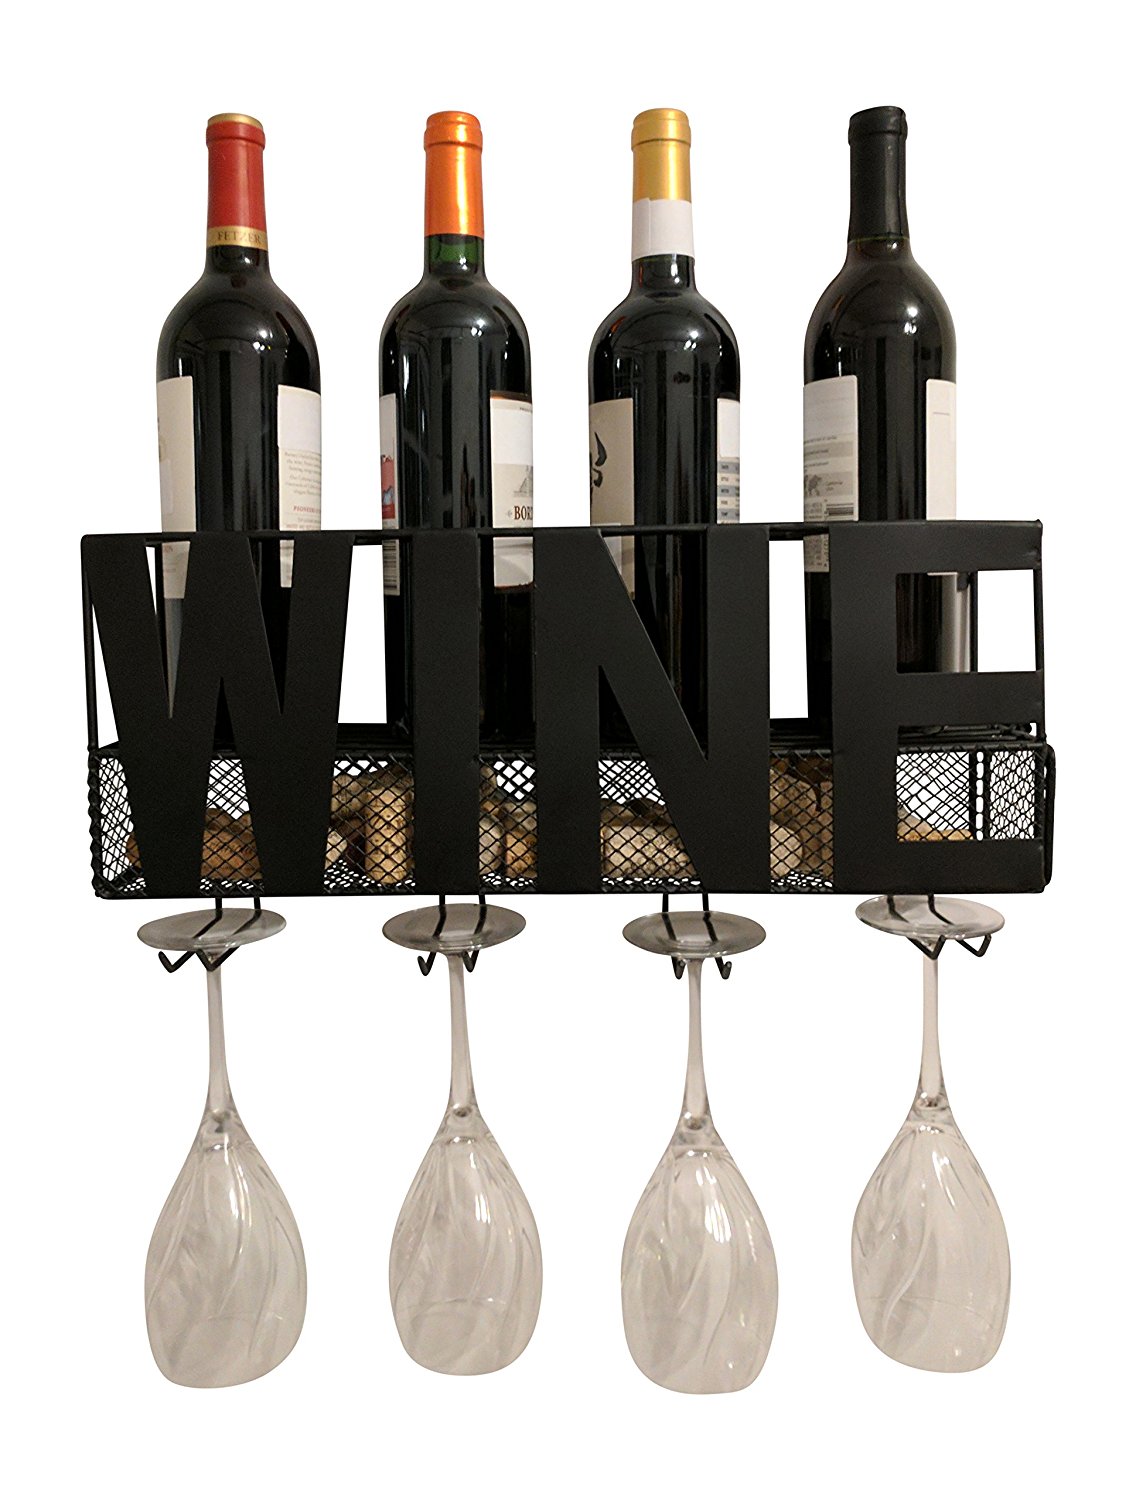 wine holder that holds bottles, glasses, and corks. Makes the perfect housewarming gift